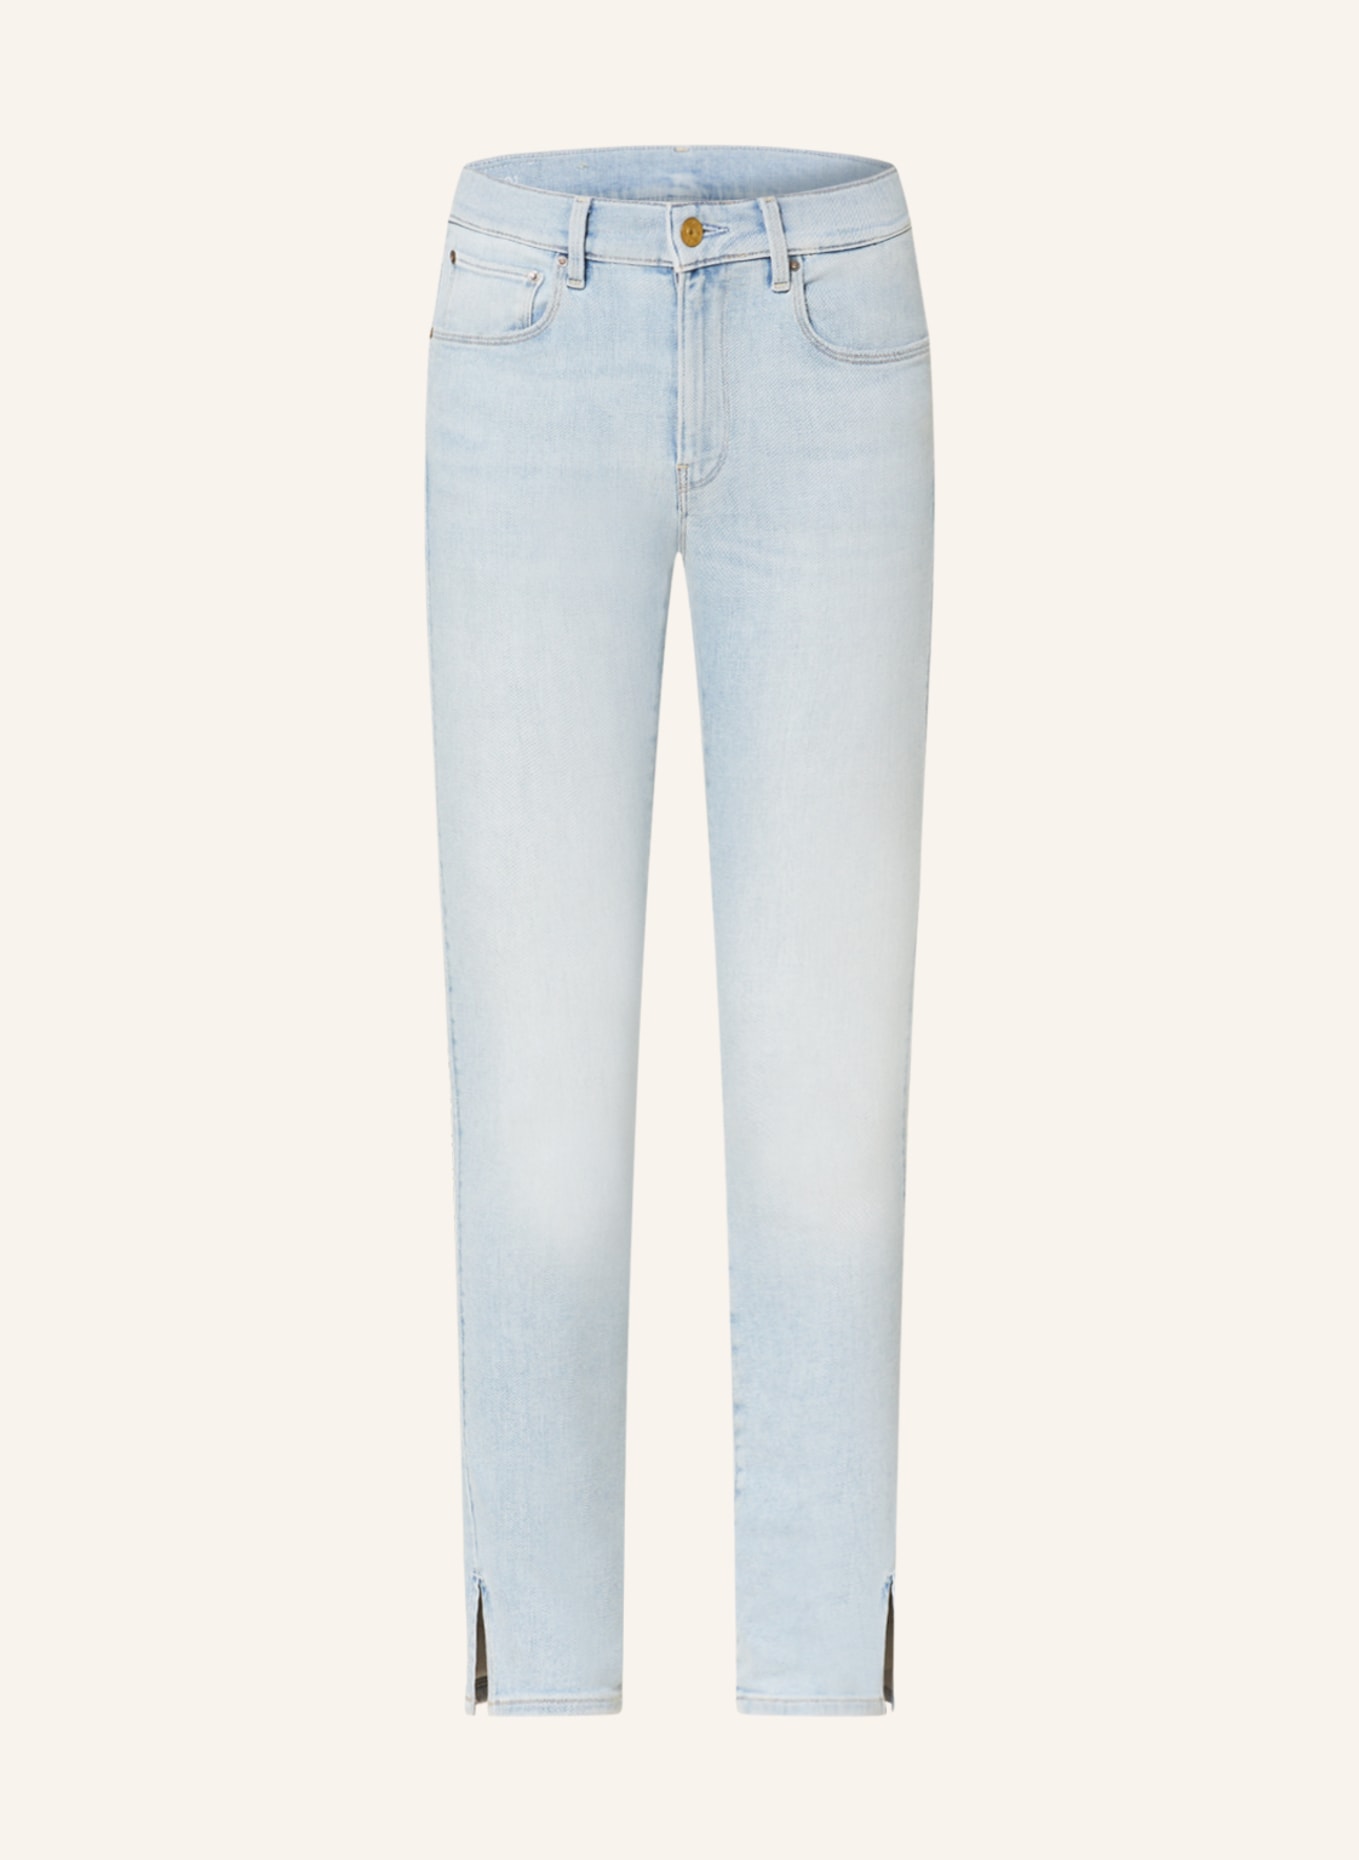 G-Star RAW Skinny jeans 3301, Color: G307 sun faded bluejay (Image 1)